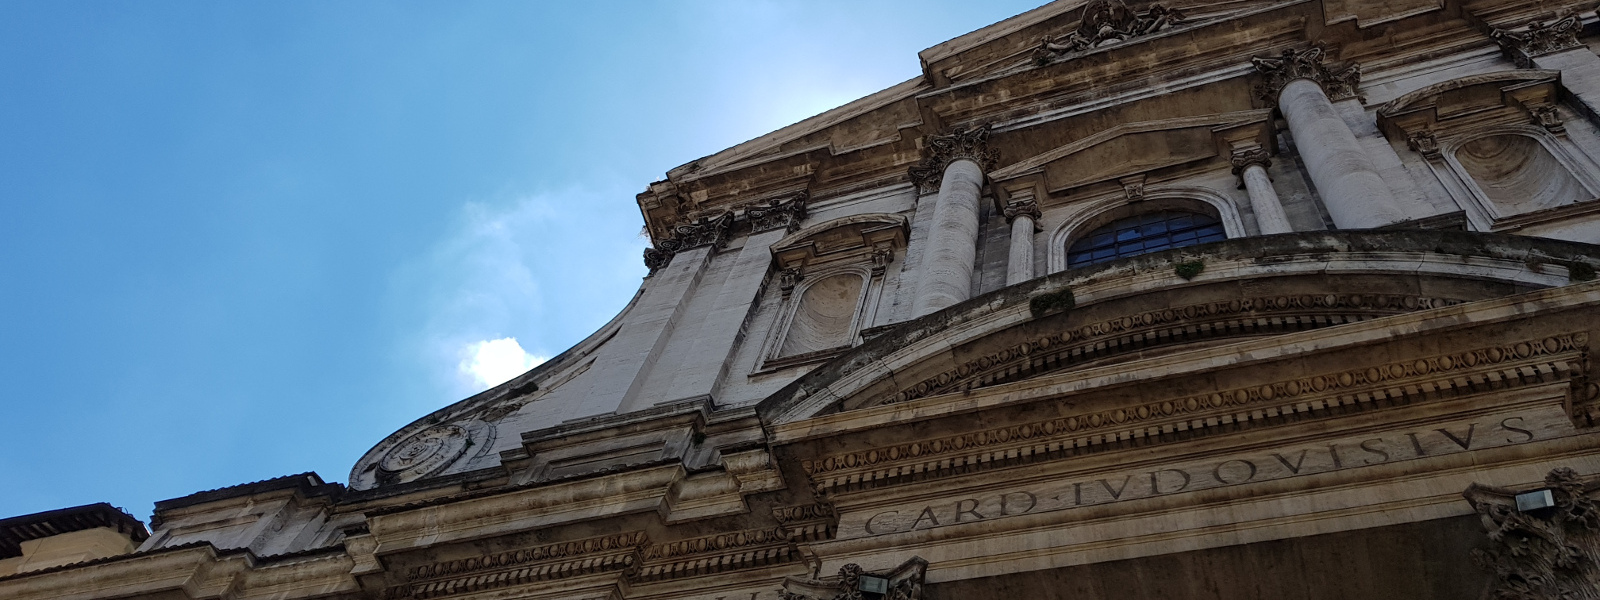 Detail of the facade of the church of Saint Ignatius in the Campo Marzio district in Rome